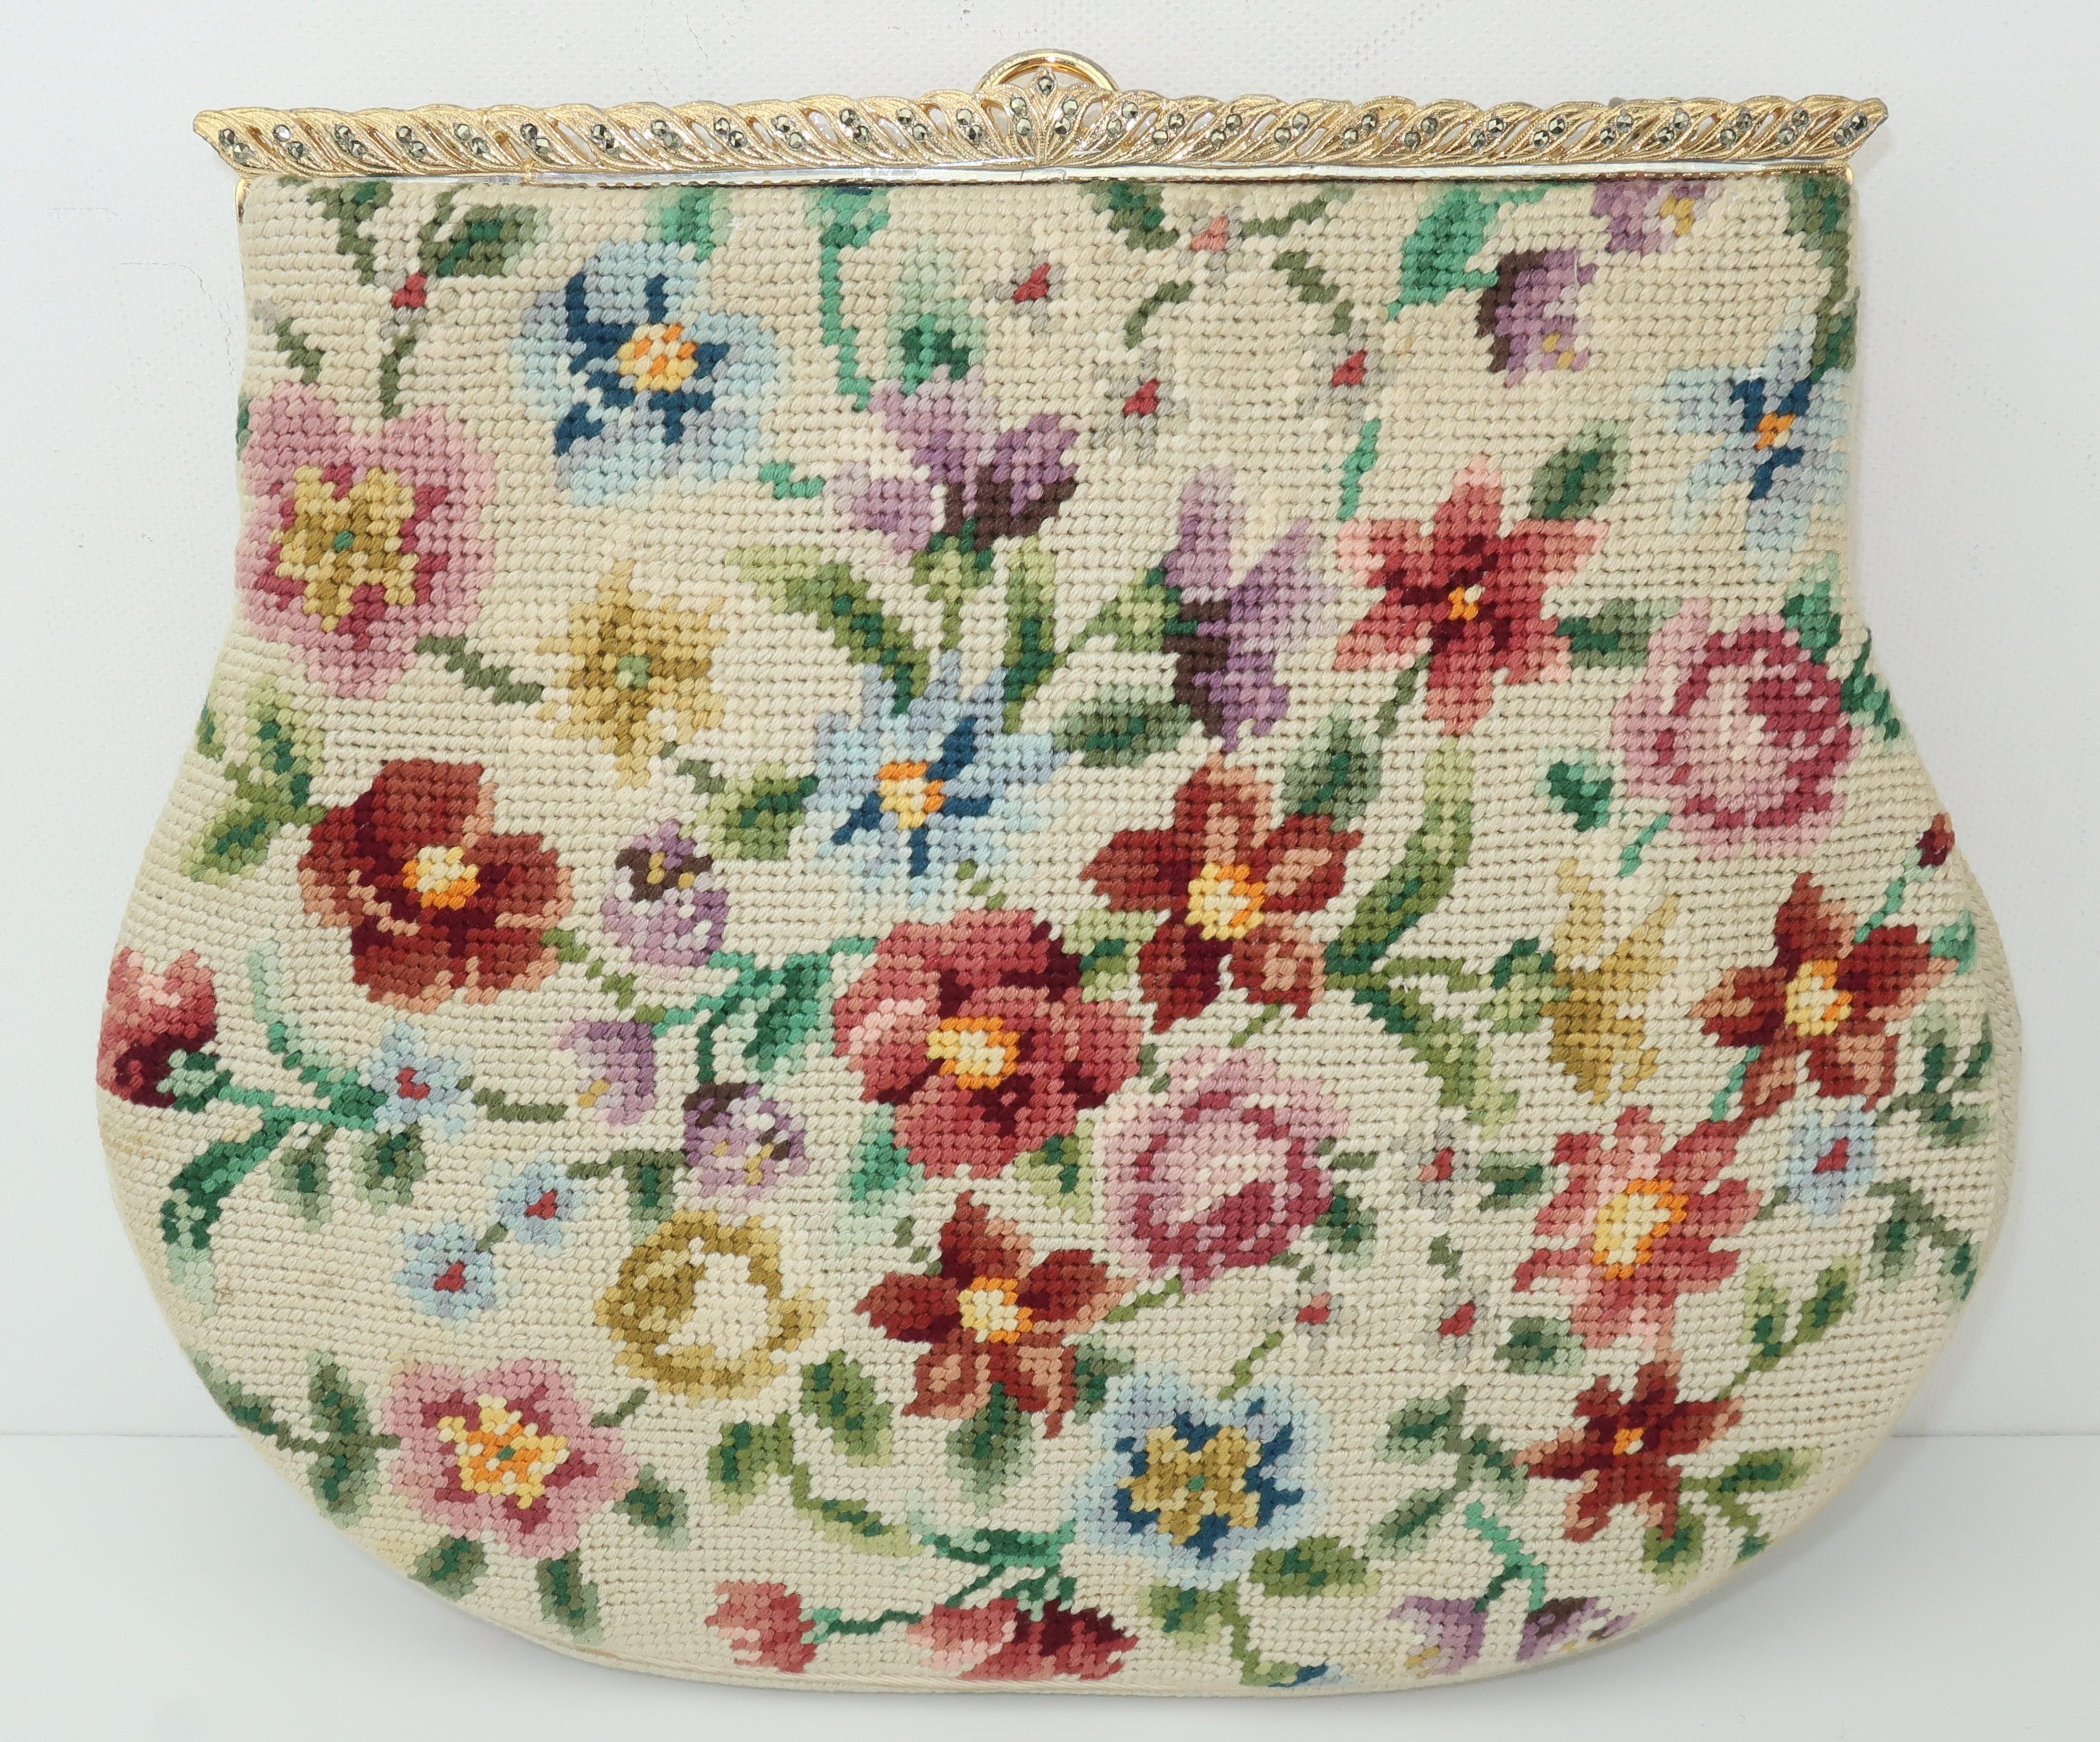 Granny bag chic!  Switkes handbags were designed by artist, Stan Switkes, in the 1940's and 1950's.  This charming floral needlepoint handbag is characteristic of his designs incorporating a floral bouquet in shades of antique white, browns, blues,